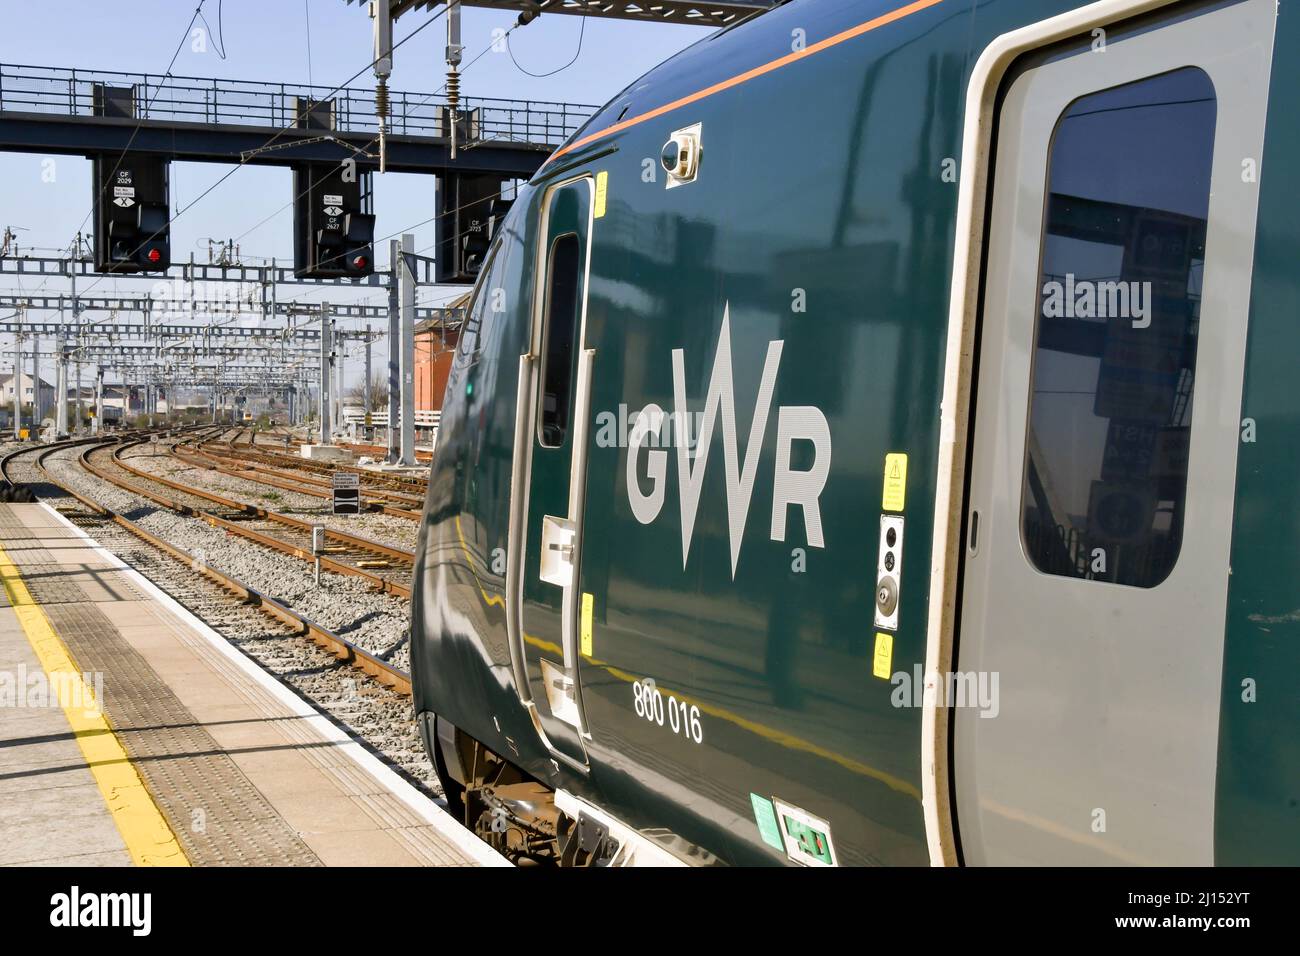 Cardiff, Wales - March 2022: Class 800 high speed train operated by Great Western railway waiting for to depart Cardiff Central railway station Stock Photo